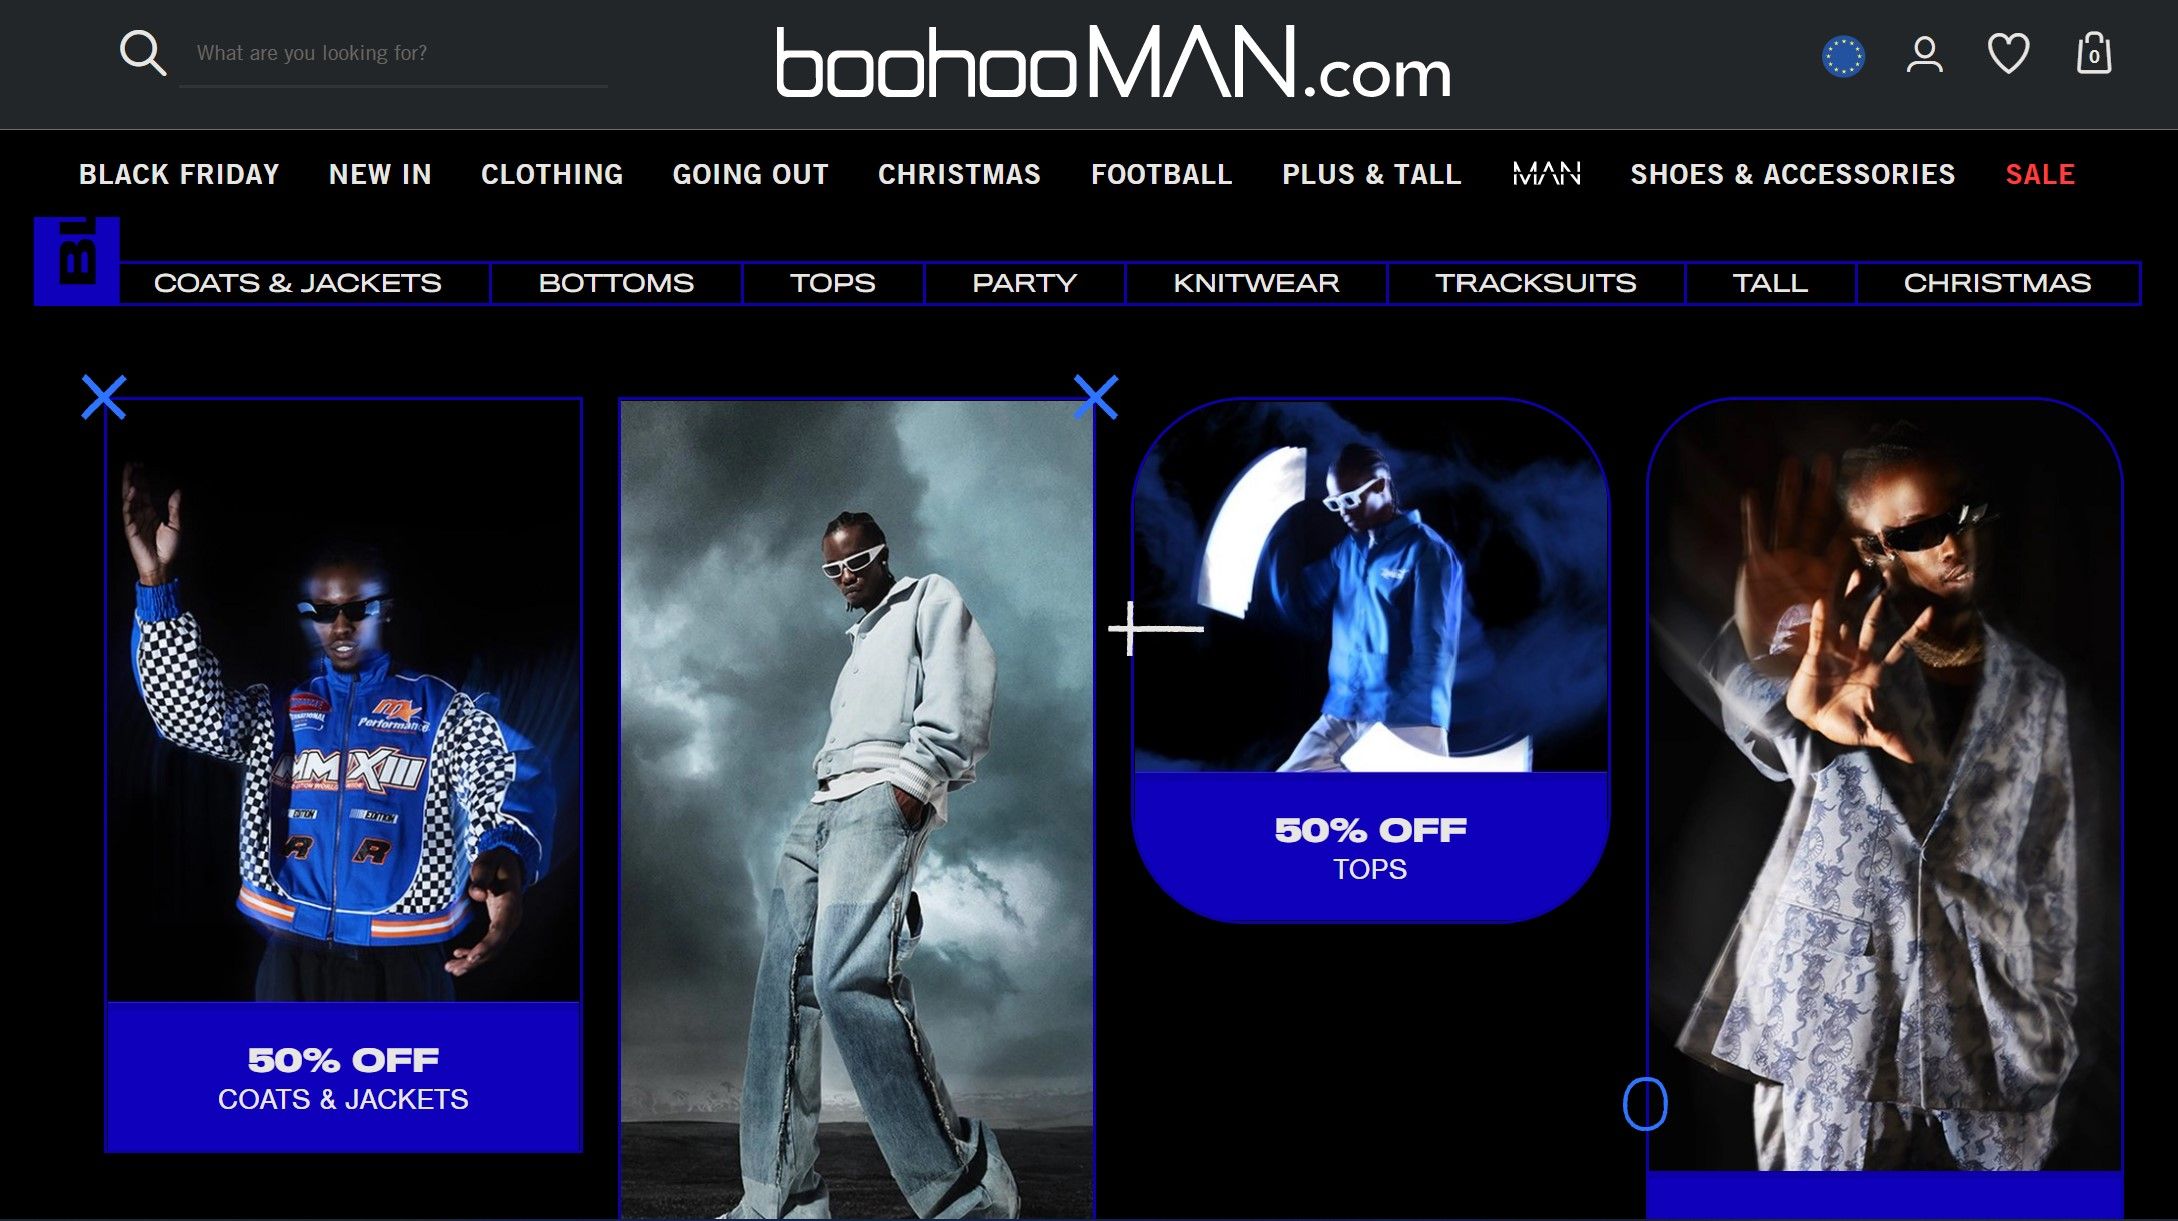 Boohooman website home page showing different listings